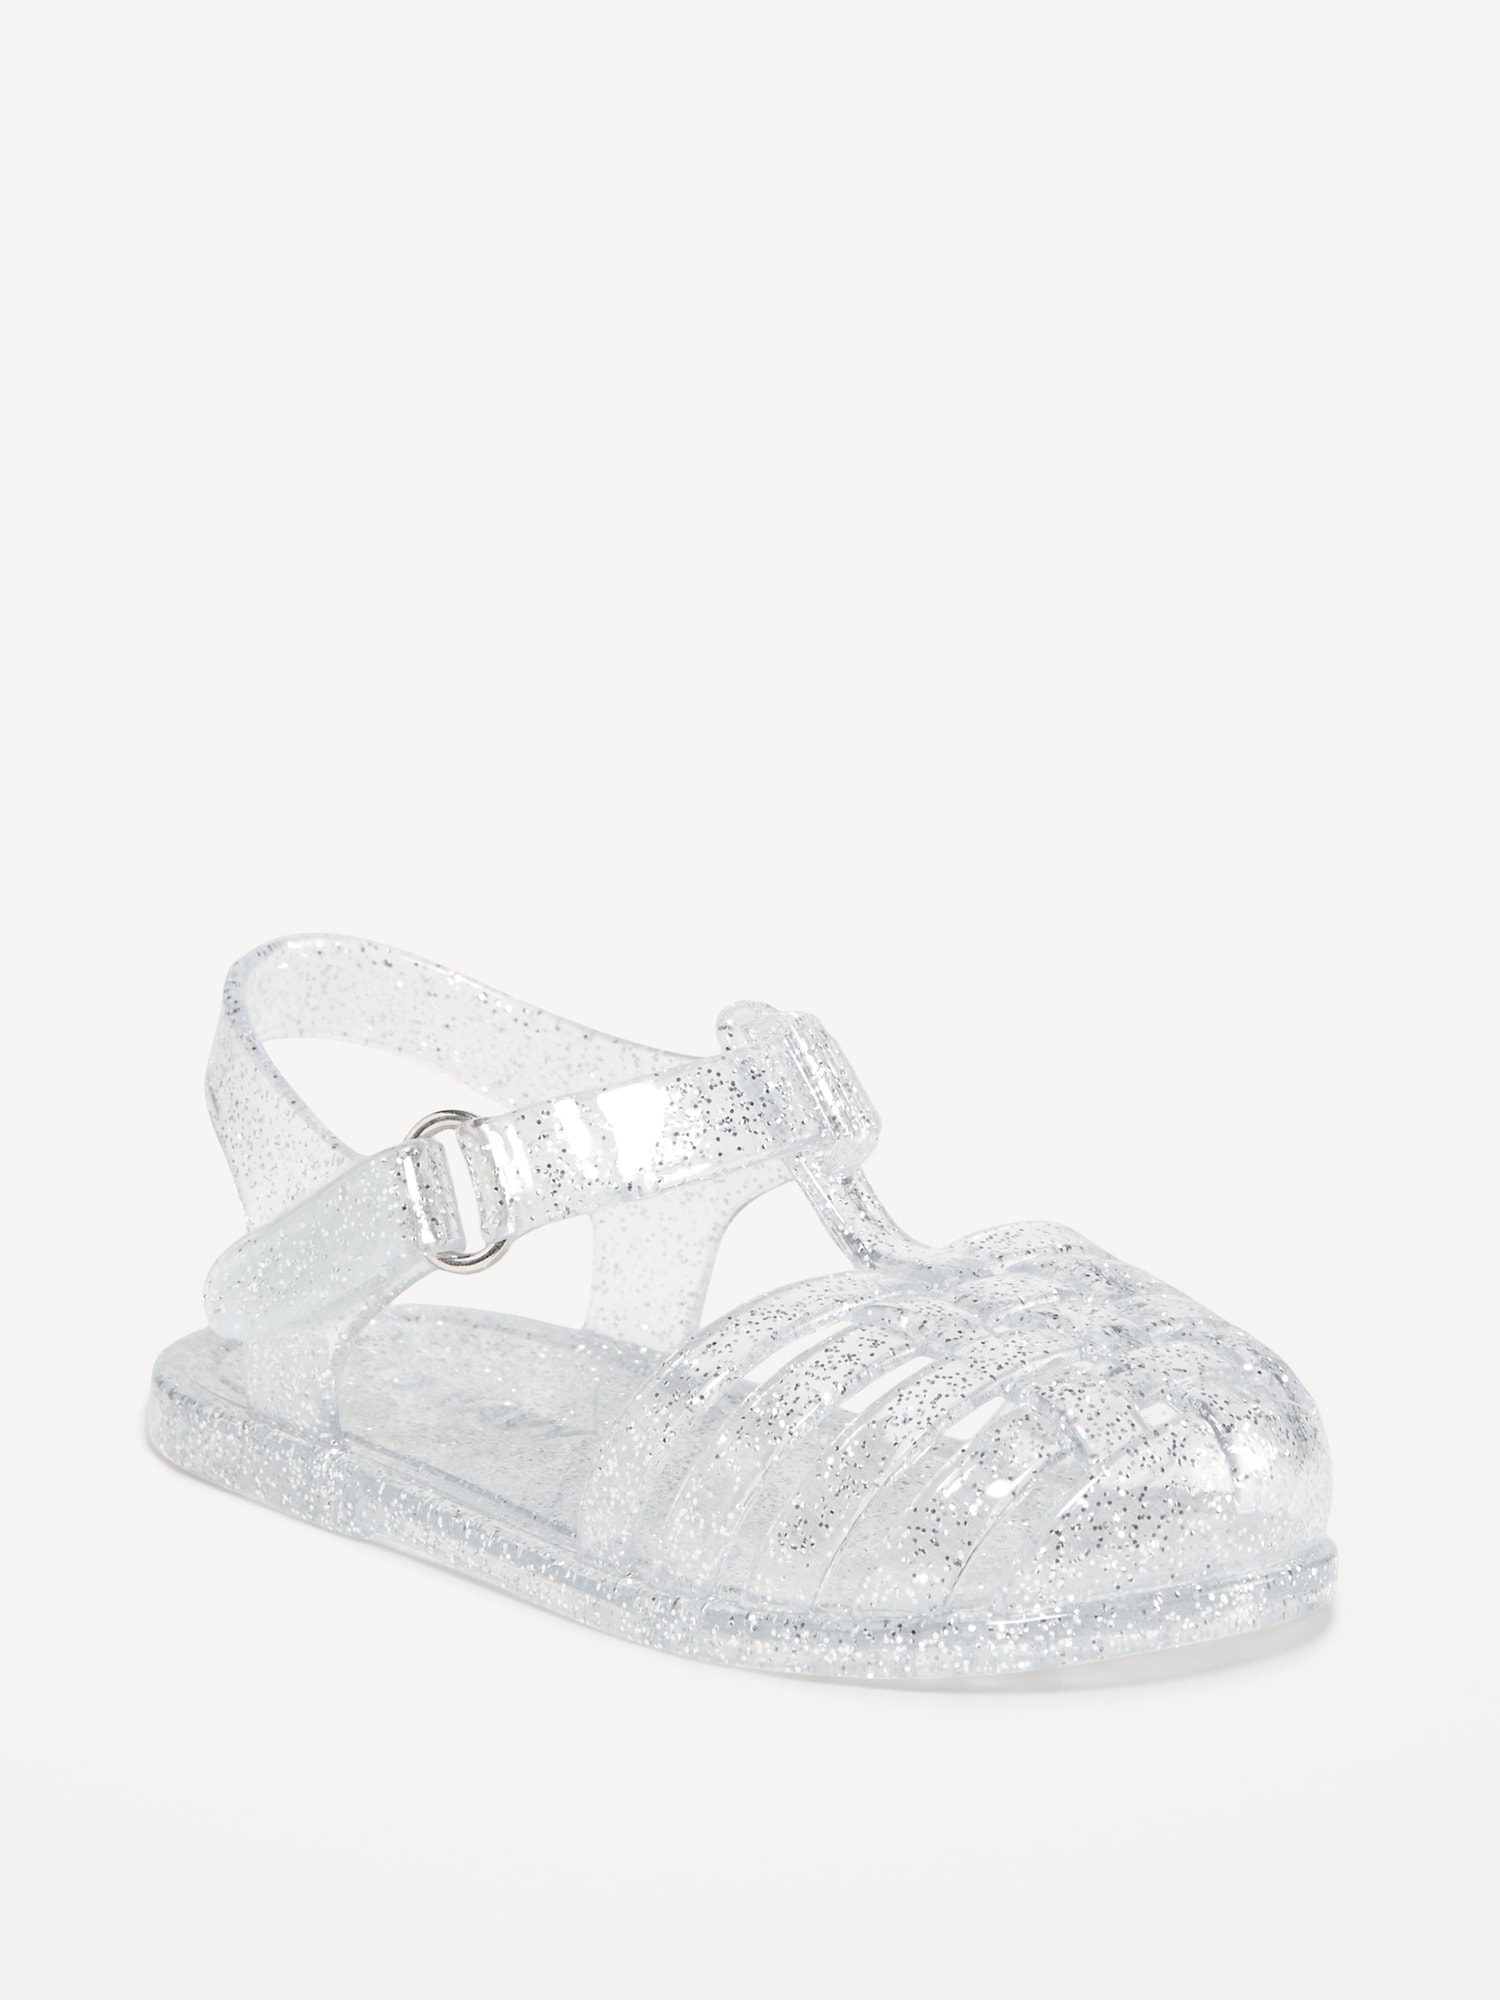 Jelly Fisherman Sandals for Baby